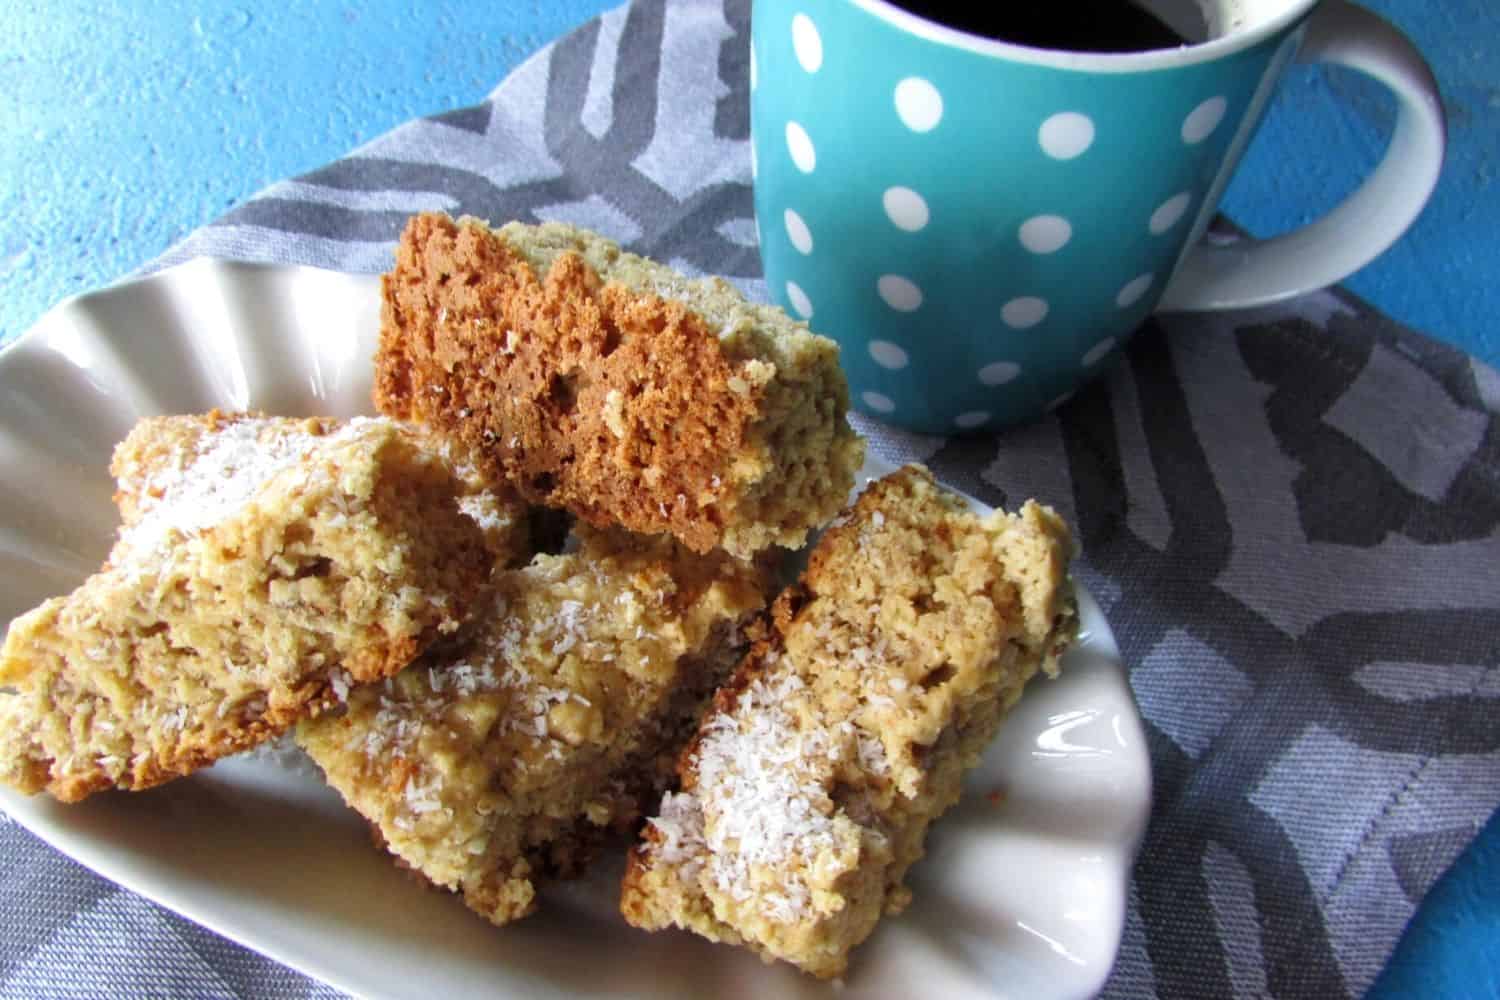 Bran Rusks baked with Coconut